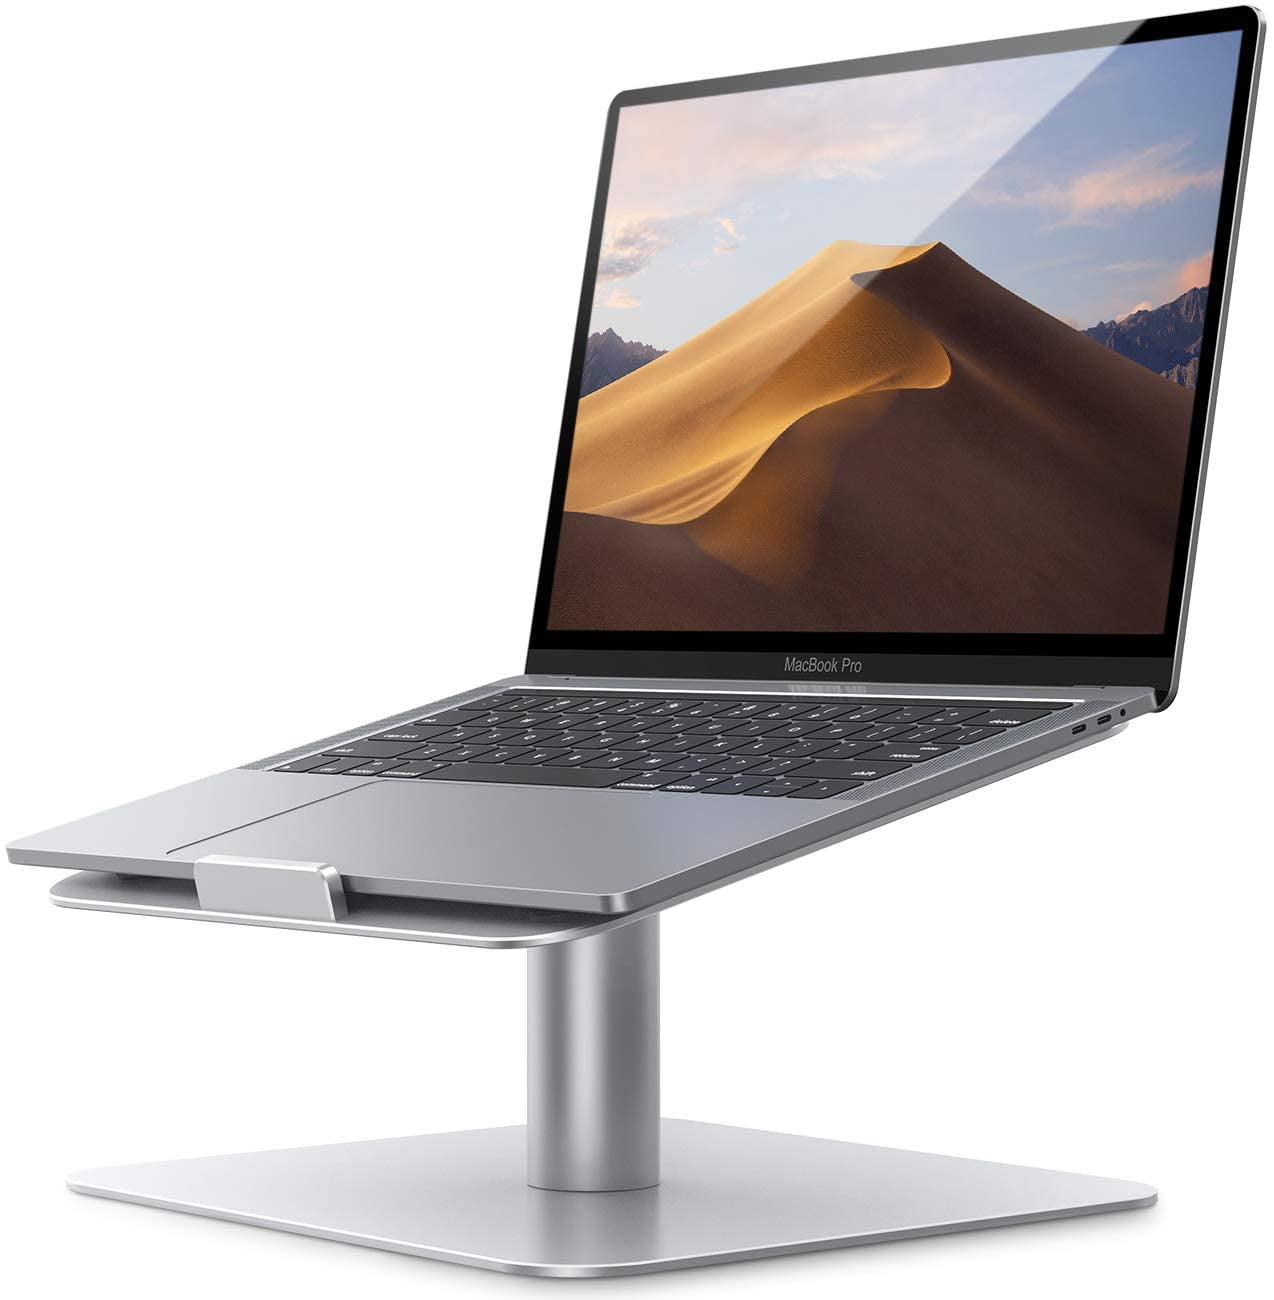 HP More PC Notebook Dell Lenovo Laptop Stand for Desk，Stable MacBook Pro Stand，Ergonomic Aluminum Computer Riser for 12 13 15 16 17 inch ， Universal Computer Cooling Stand for Mac MacBook Pro Air 